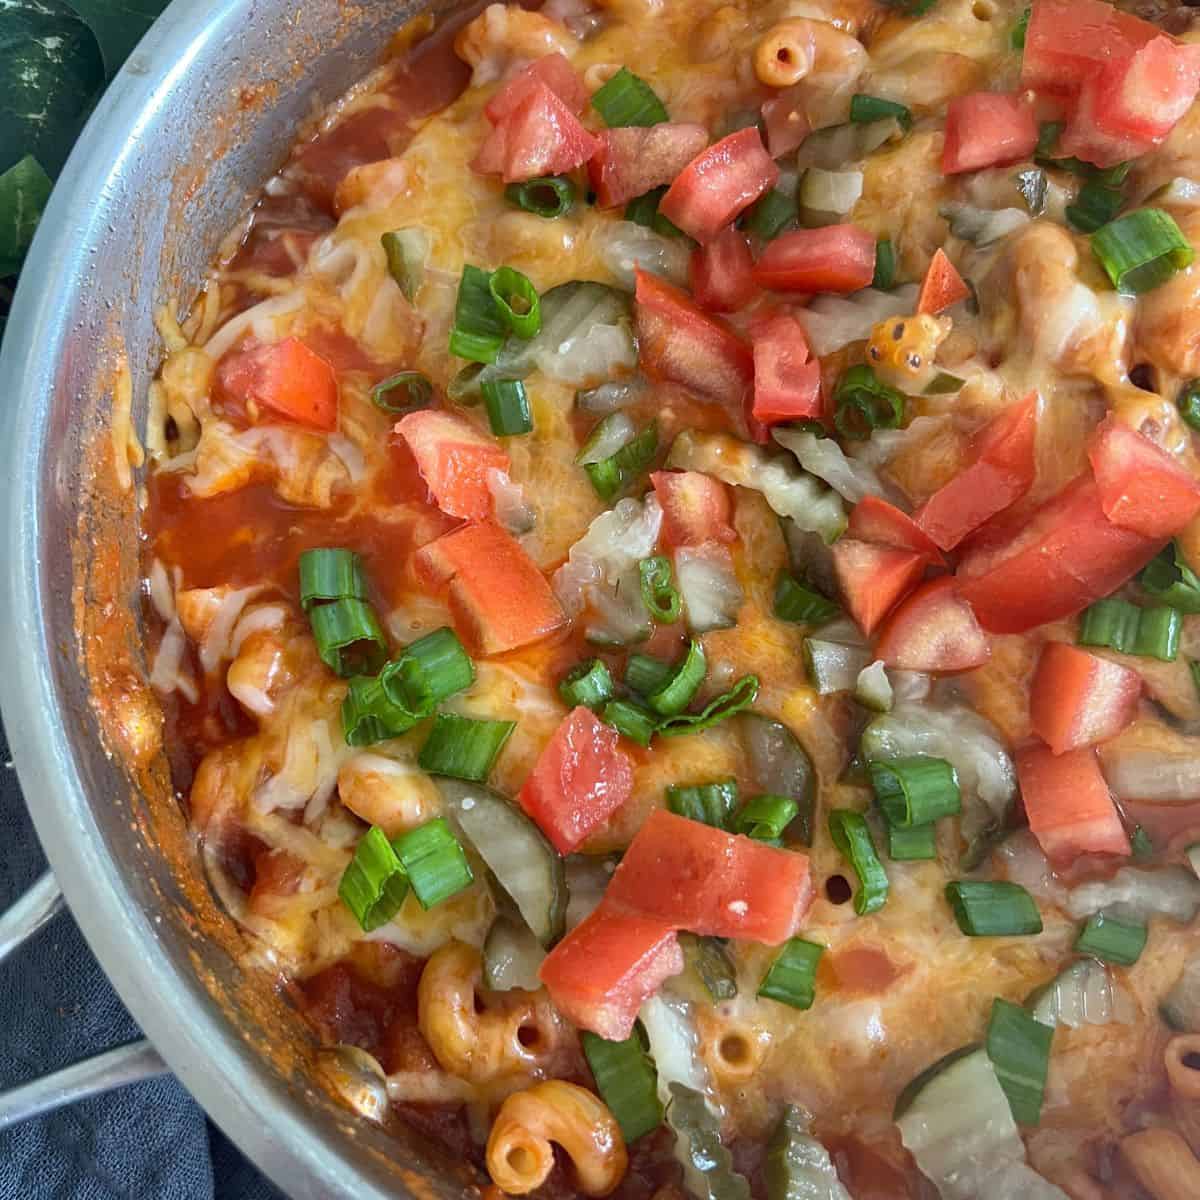 Easy One-Pot Cheeseburger pasta is ready in under 30 minutes. The noodles cook in the same pan with all the other ingredients and then you can top it off with your favorite burger toppings.